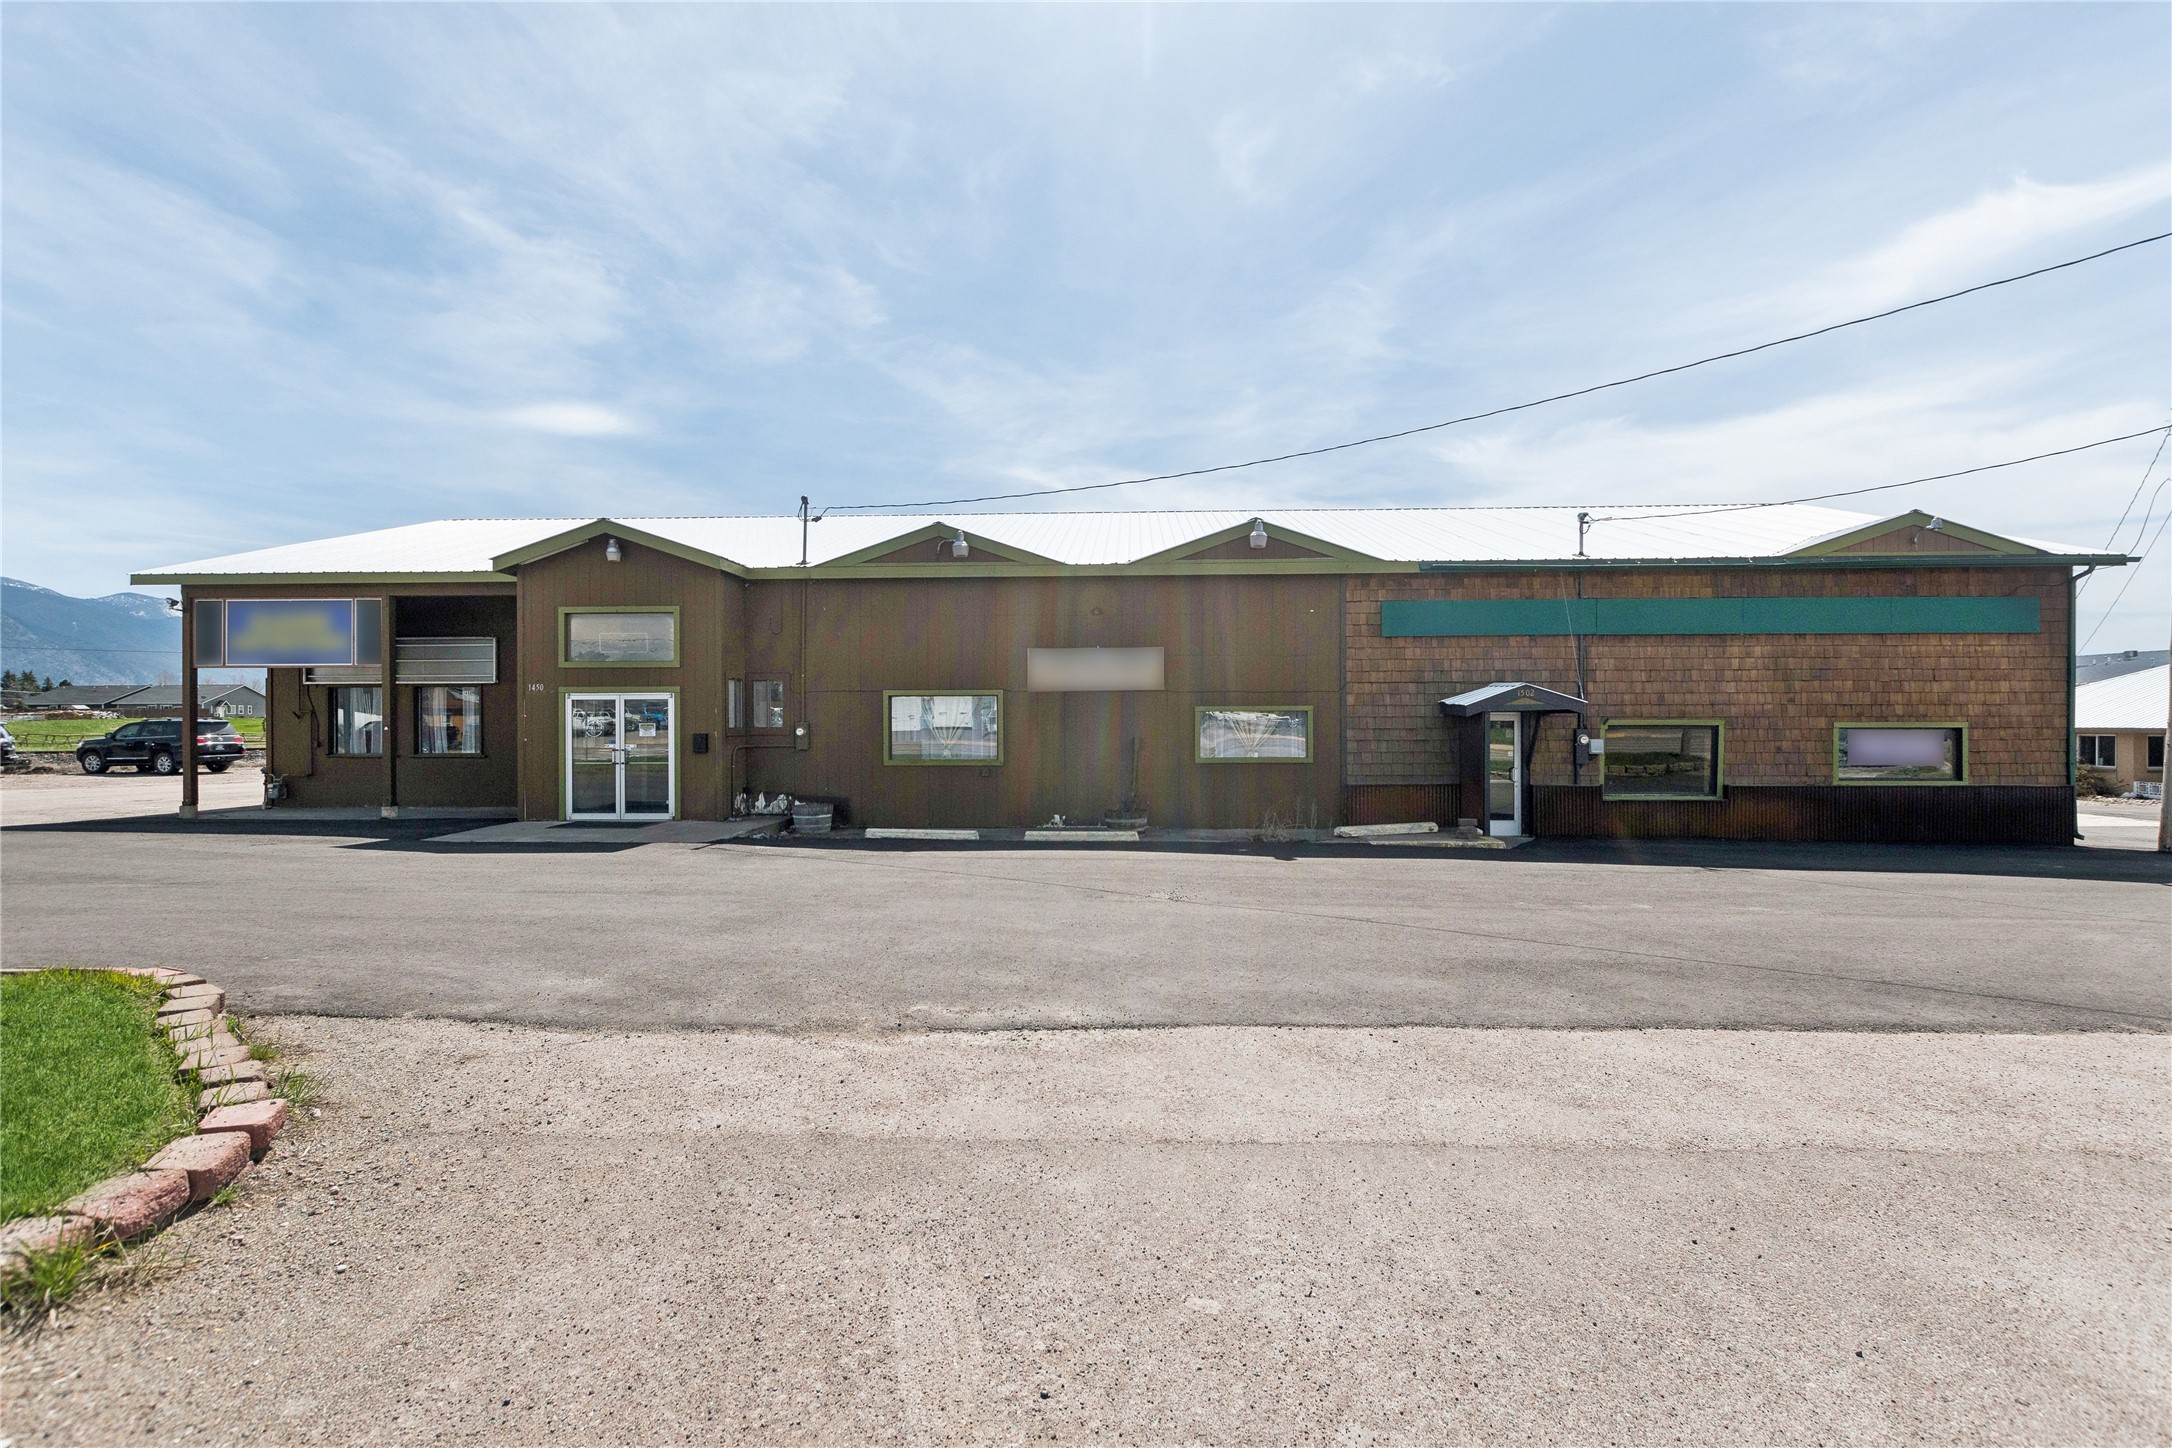 Prime investment opportunity situated on Highway 2 with over 320+ feet of frontage and a 25,000+ daily traffic count. This property offers an enviable location for business ventures. Enjoy the spaciousness of this lot with two buildings that total 8739 sq feet with plenty of paved parking. Benefit from the presence of four long-term tenants, which bring in $10,000/m currently, and will go up July 2025. Located in a thriving commercial zone, this property stands as a beacon for businesses seeking growth opportunities, especially with its proximity to Glacier National Park. With established tenants already in place, investors can enjoy stable cash flow from day one. Positioned in a rapidly expanding area with the combination of a prime location and thriving community, make this an attractive investment opportunity. Seize the chance to enhance your investment portfolio in one of Montana's most promising areas. Schedule a showing today to explore the potential this property holds!